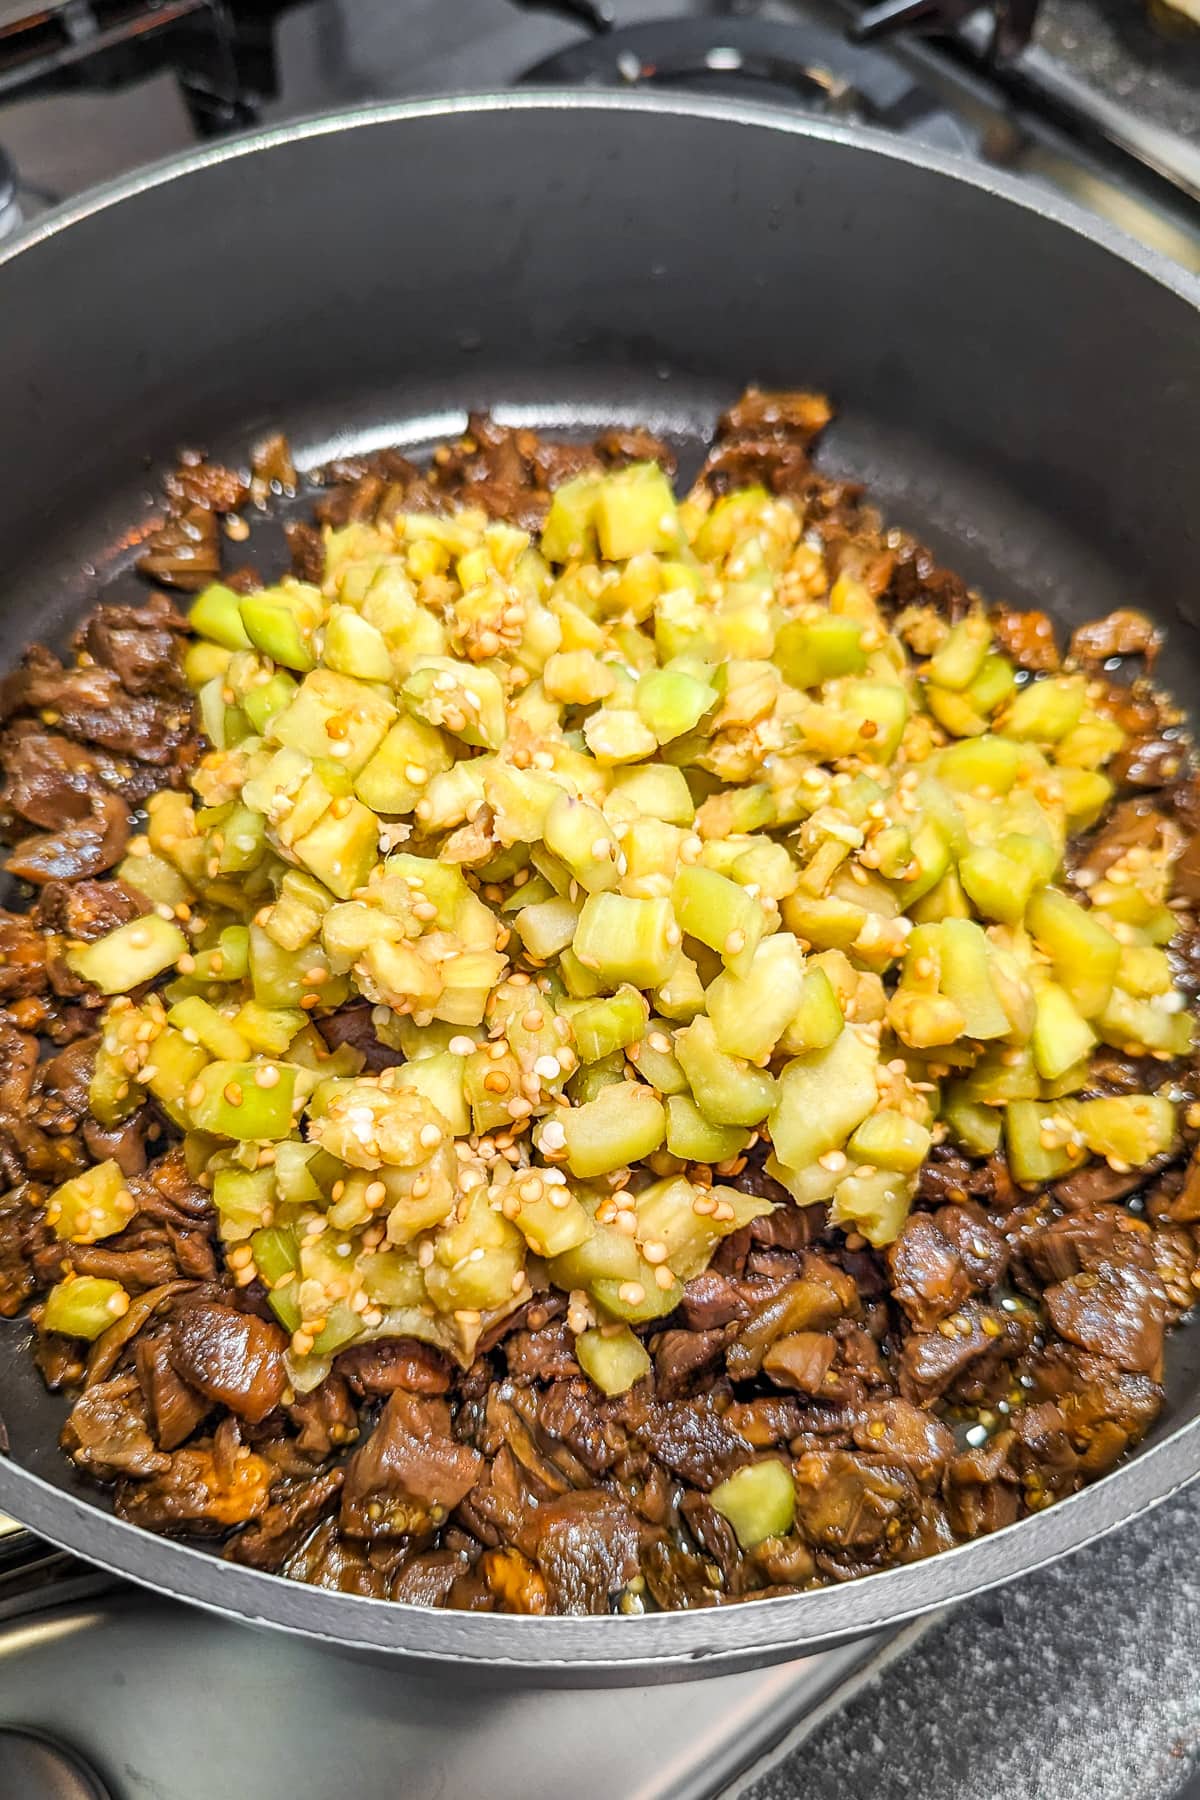 A pan on the stove with cooked diced eggplants.